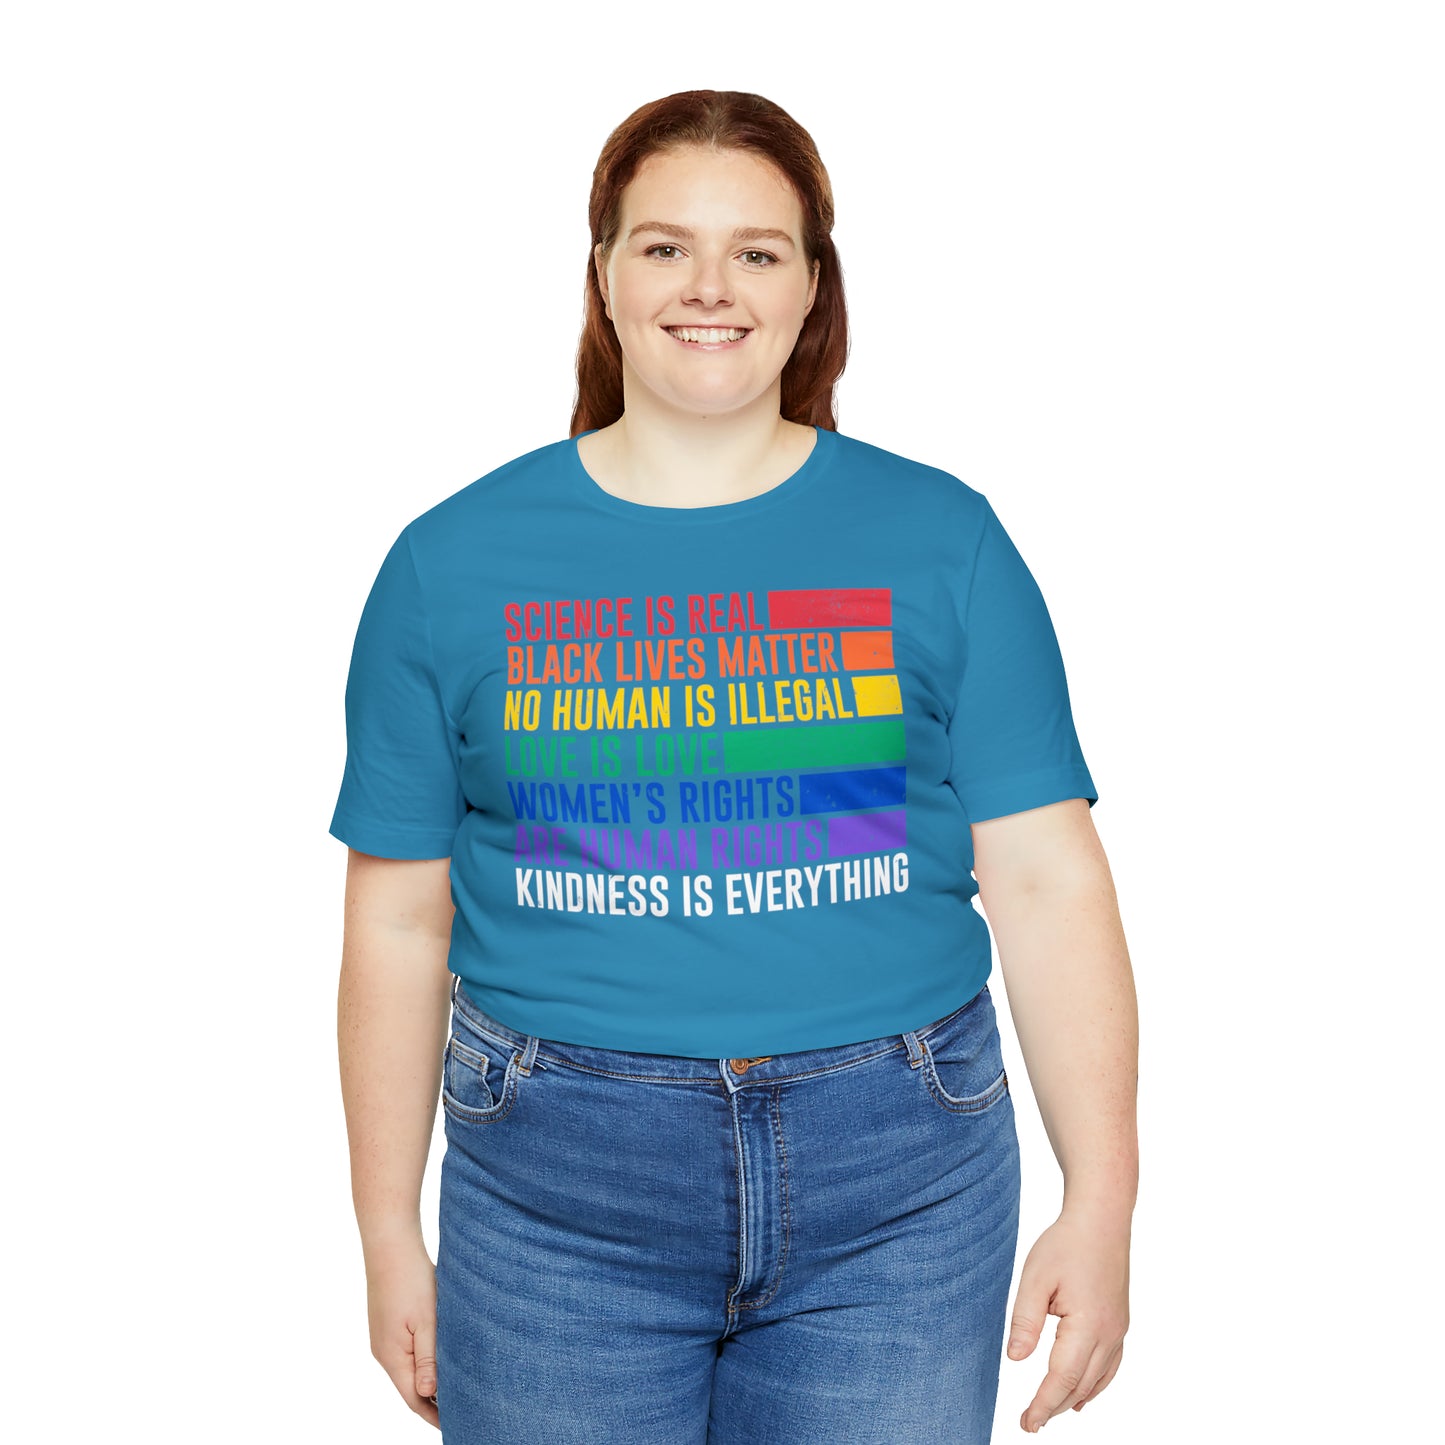 Plus size Science is Real, Black Lives Matter, Love is Love Short Sleeve Tee